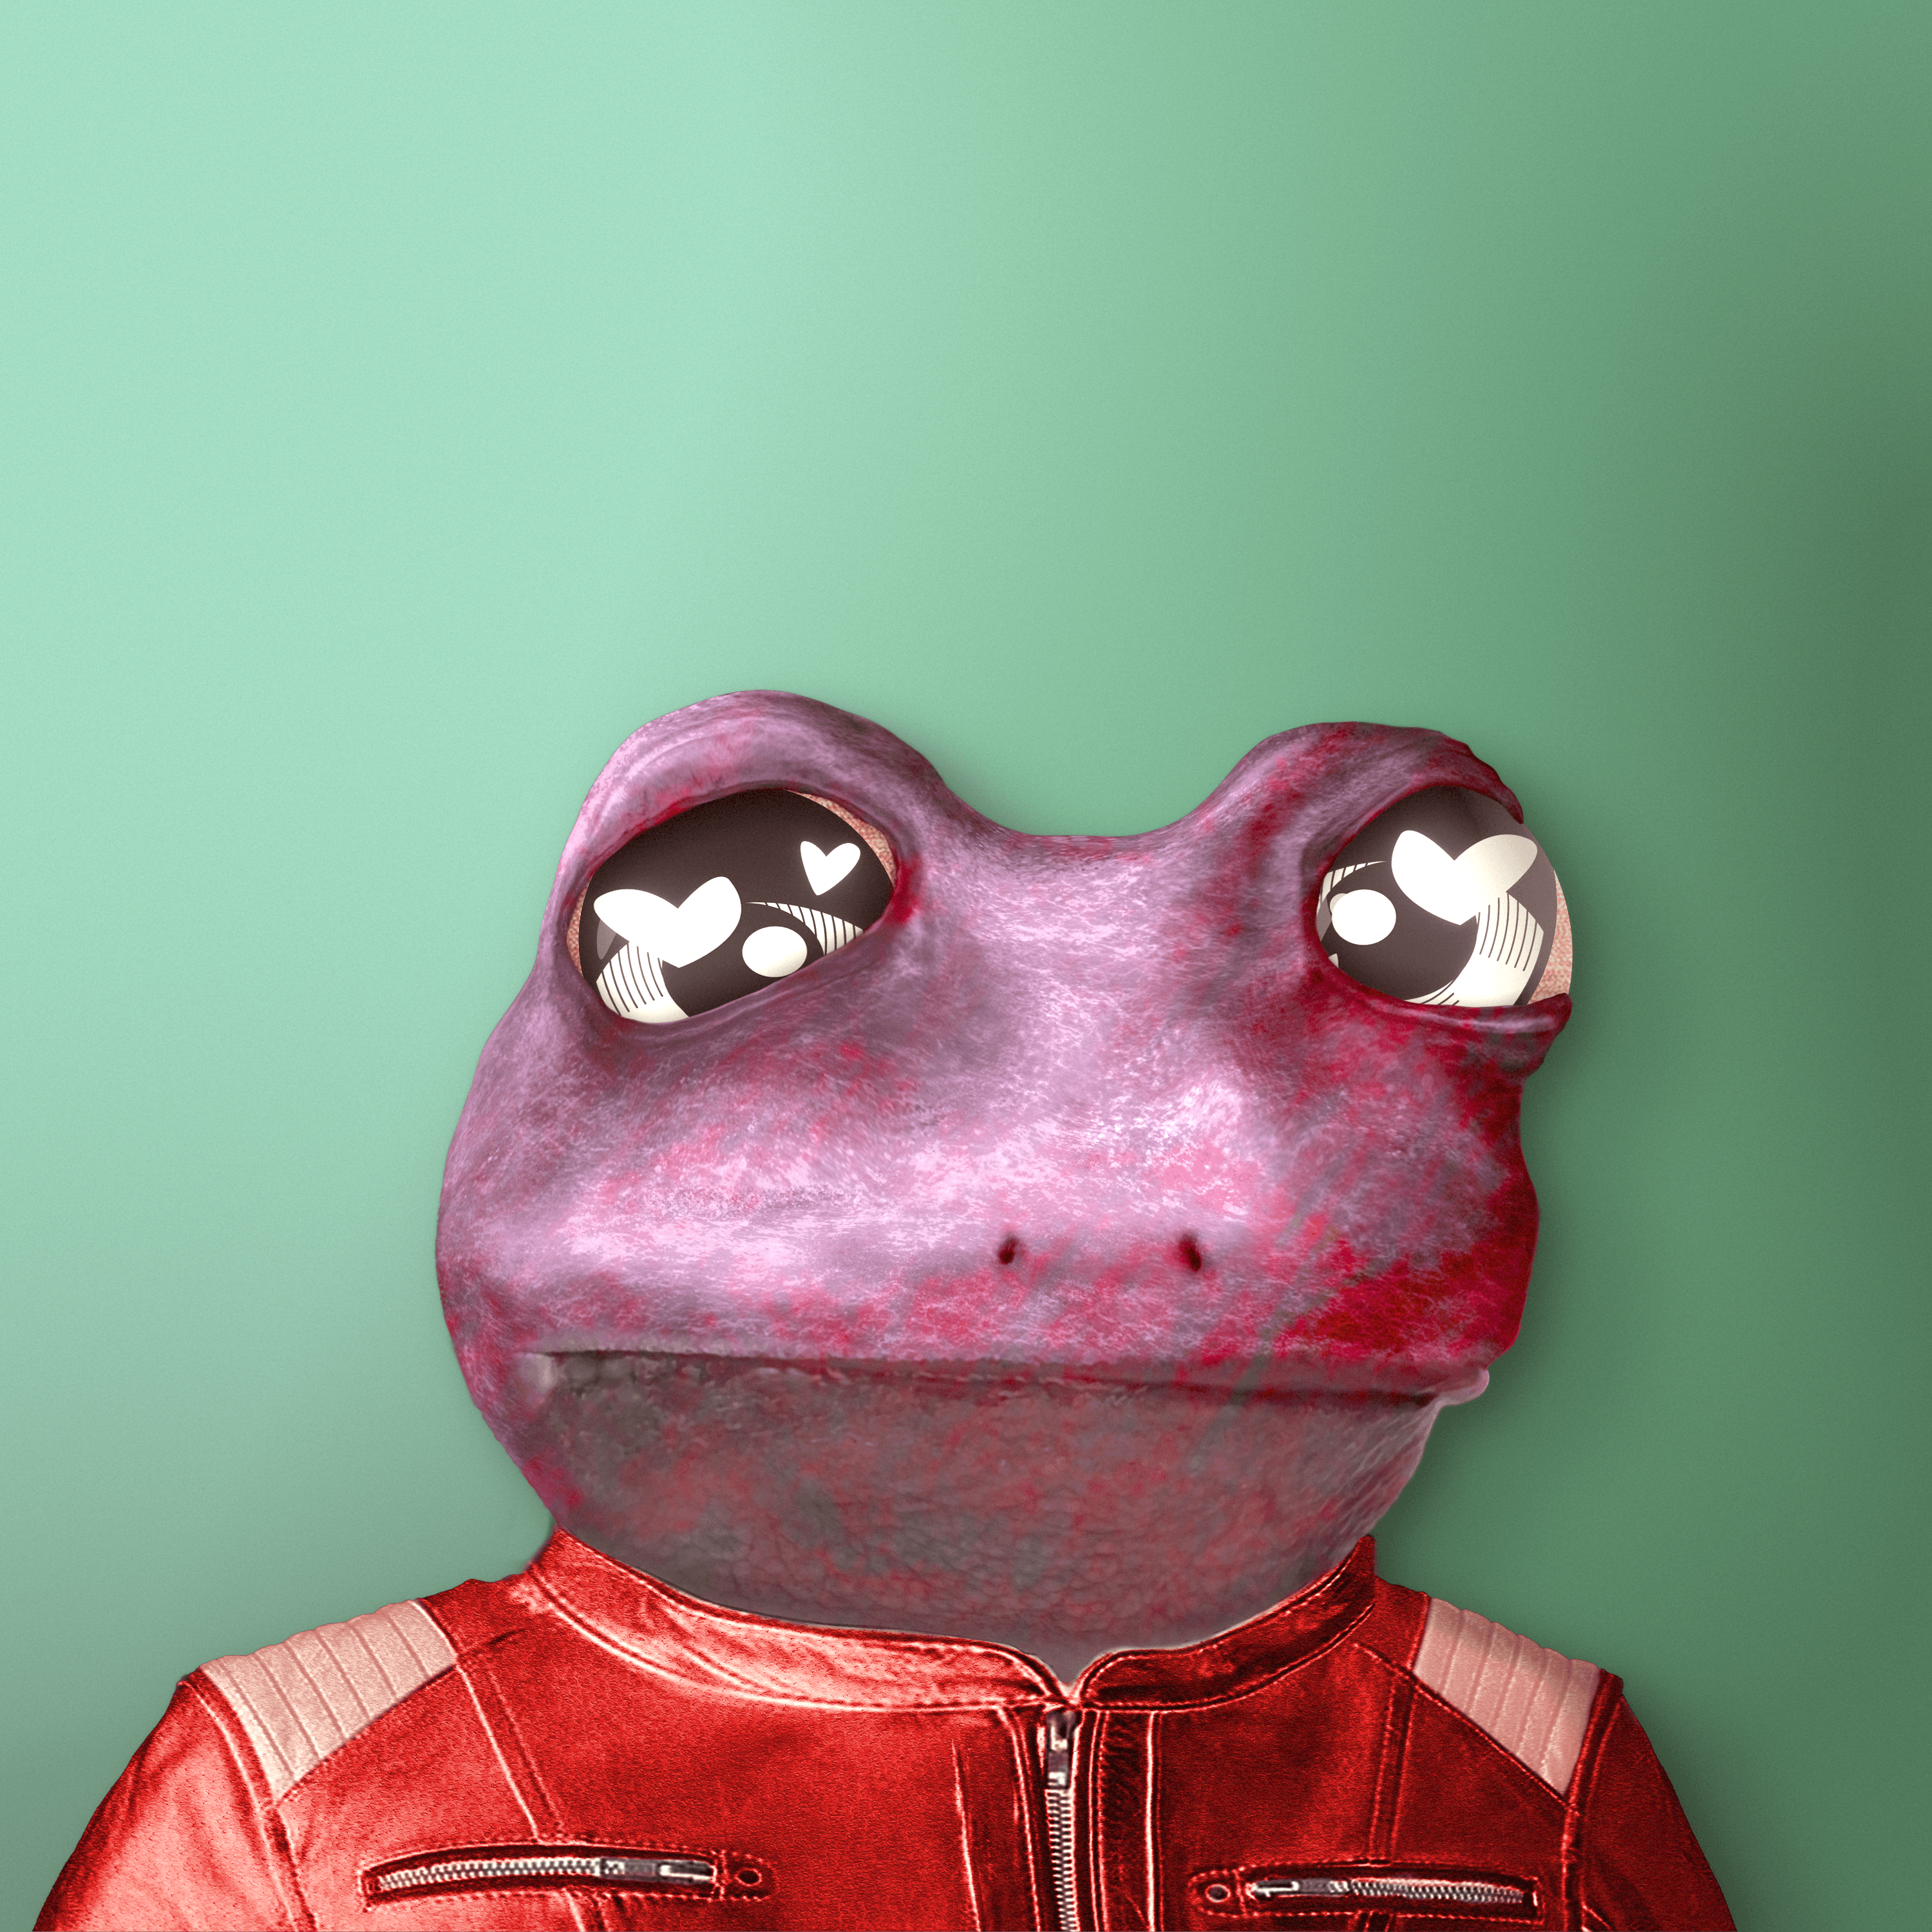 Notorious Frog #9417